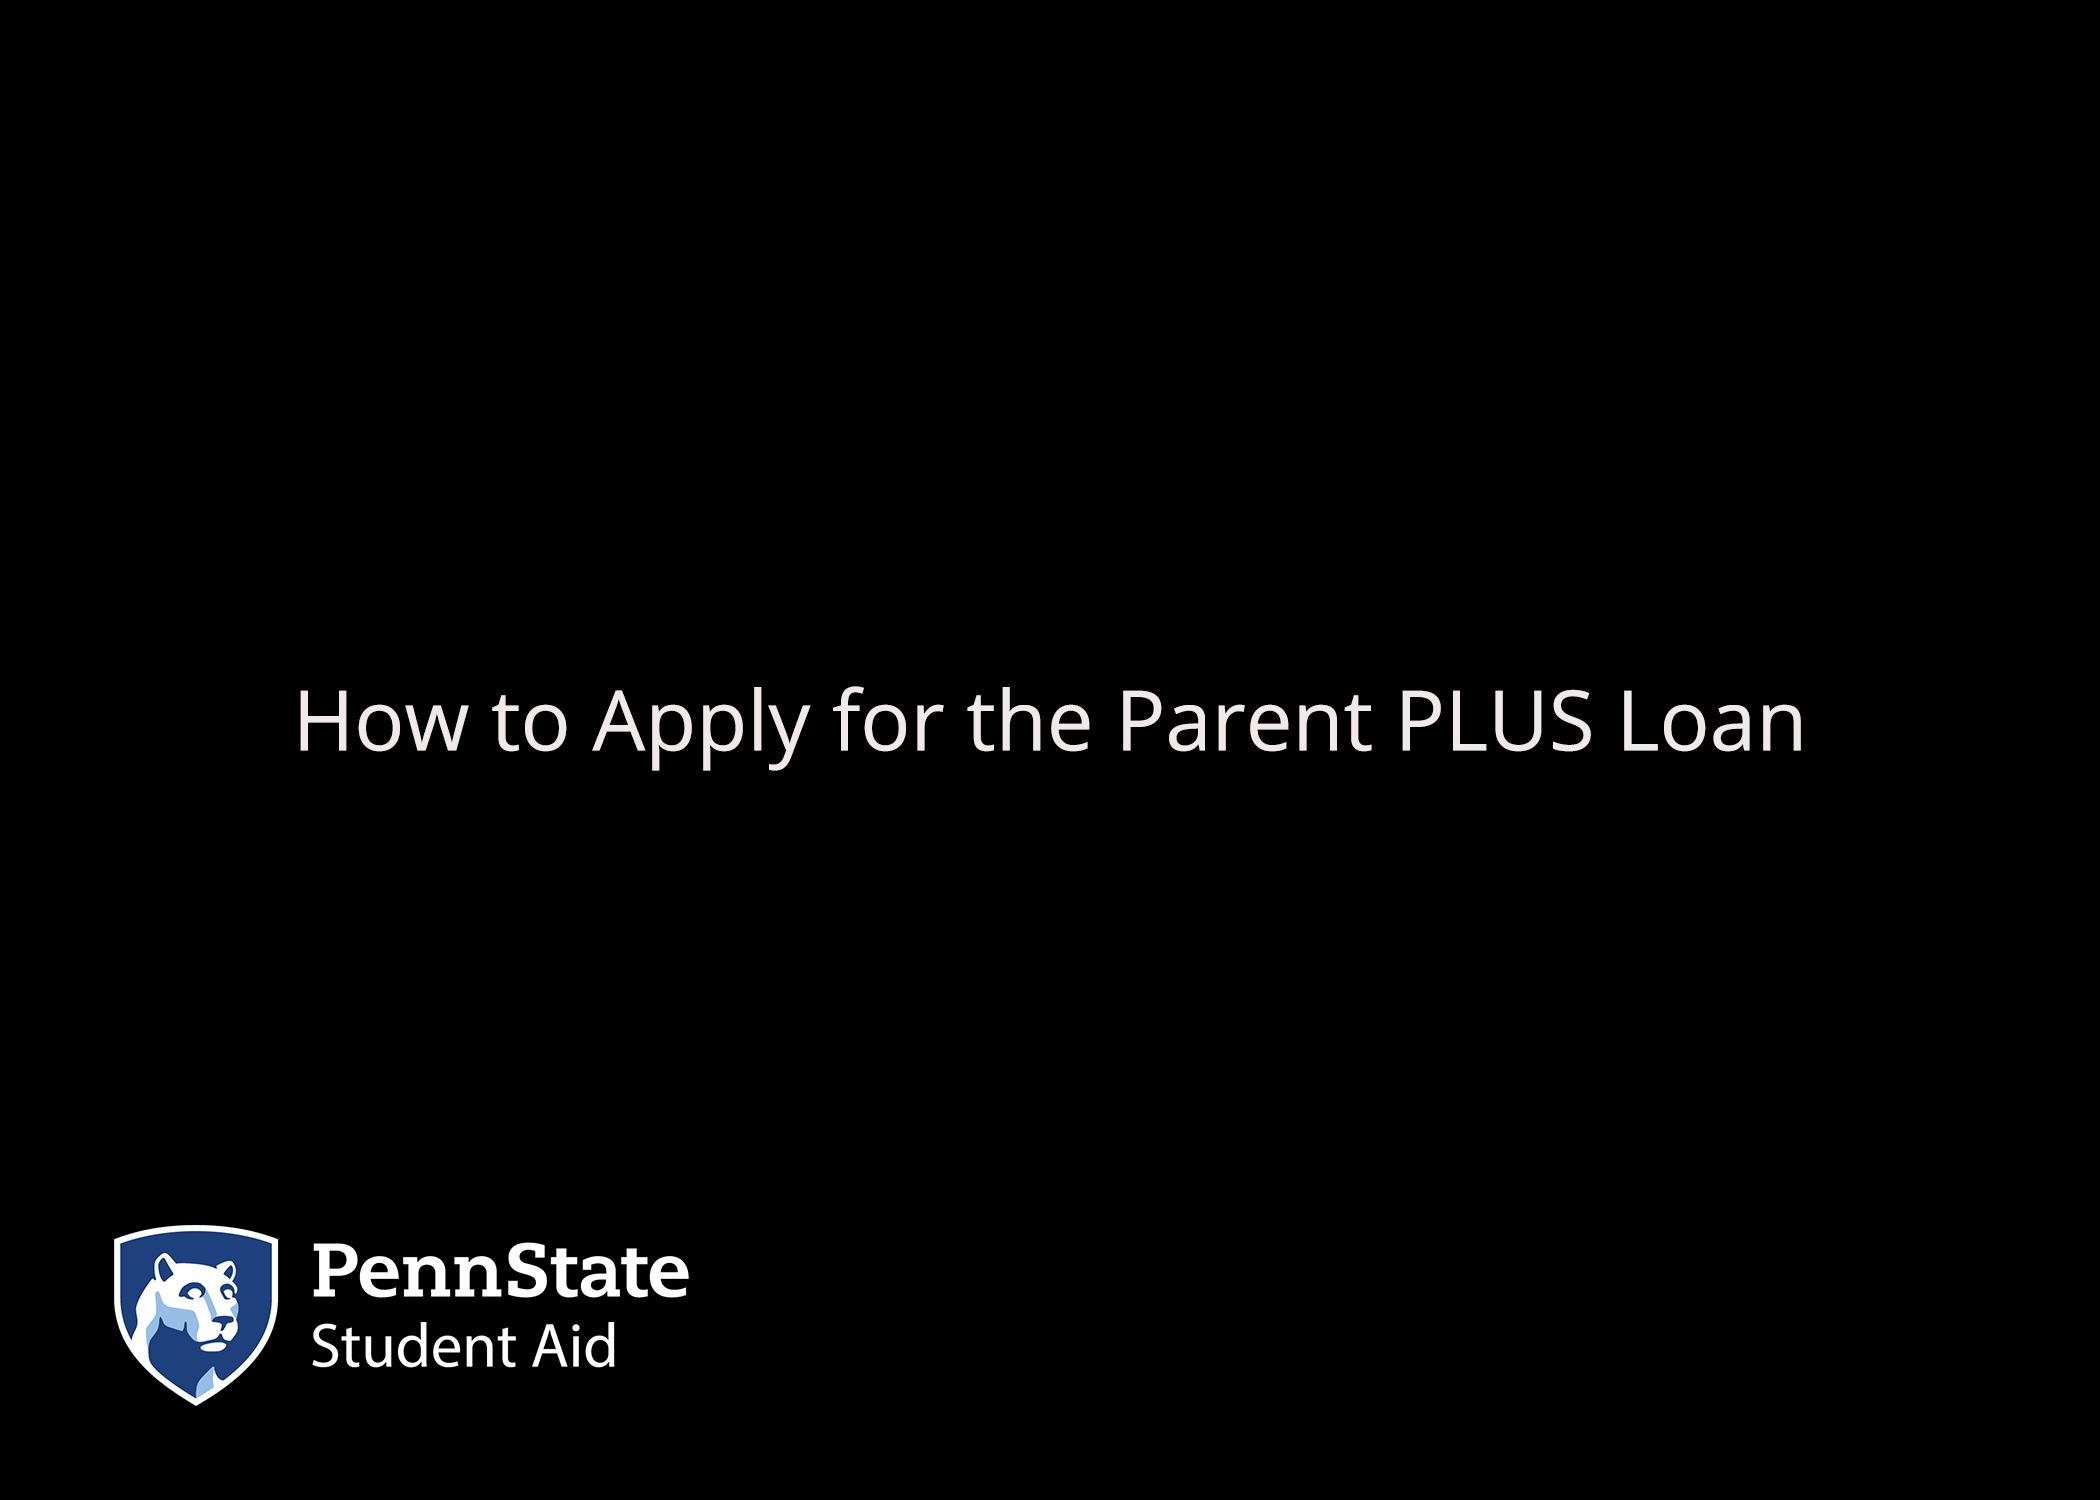 How to Apply for a Parent PLUS Loan